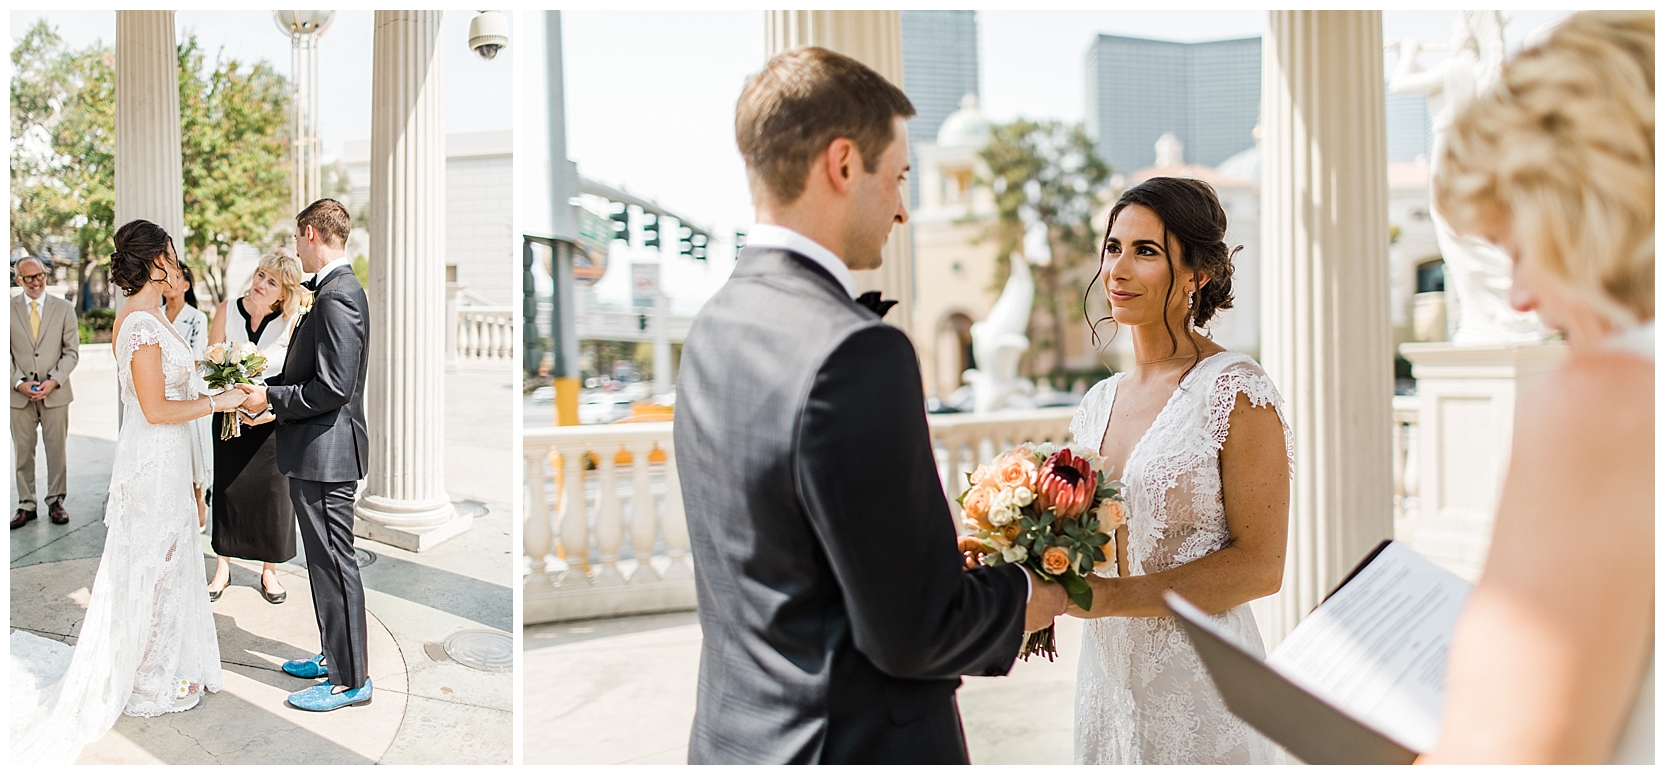 Las Vegas Elopement at the Bellagio photo by Lindsey Ramdin, L.A.R. Weddings